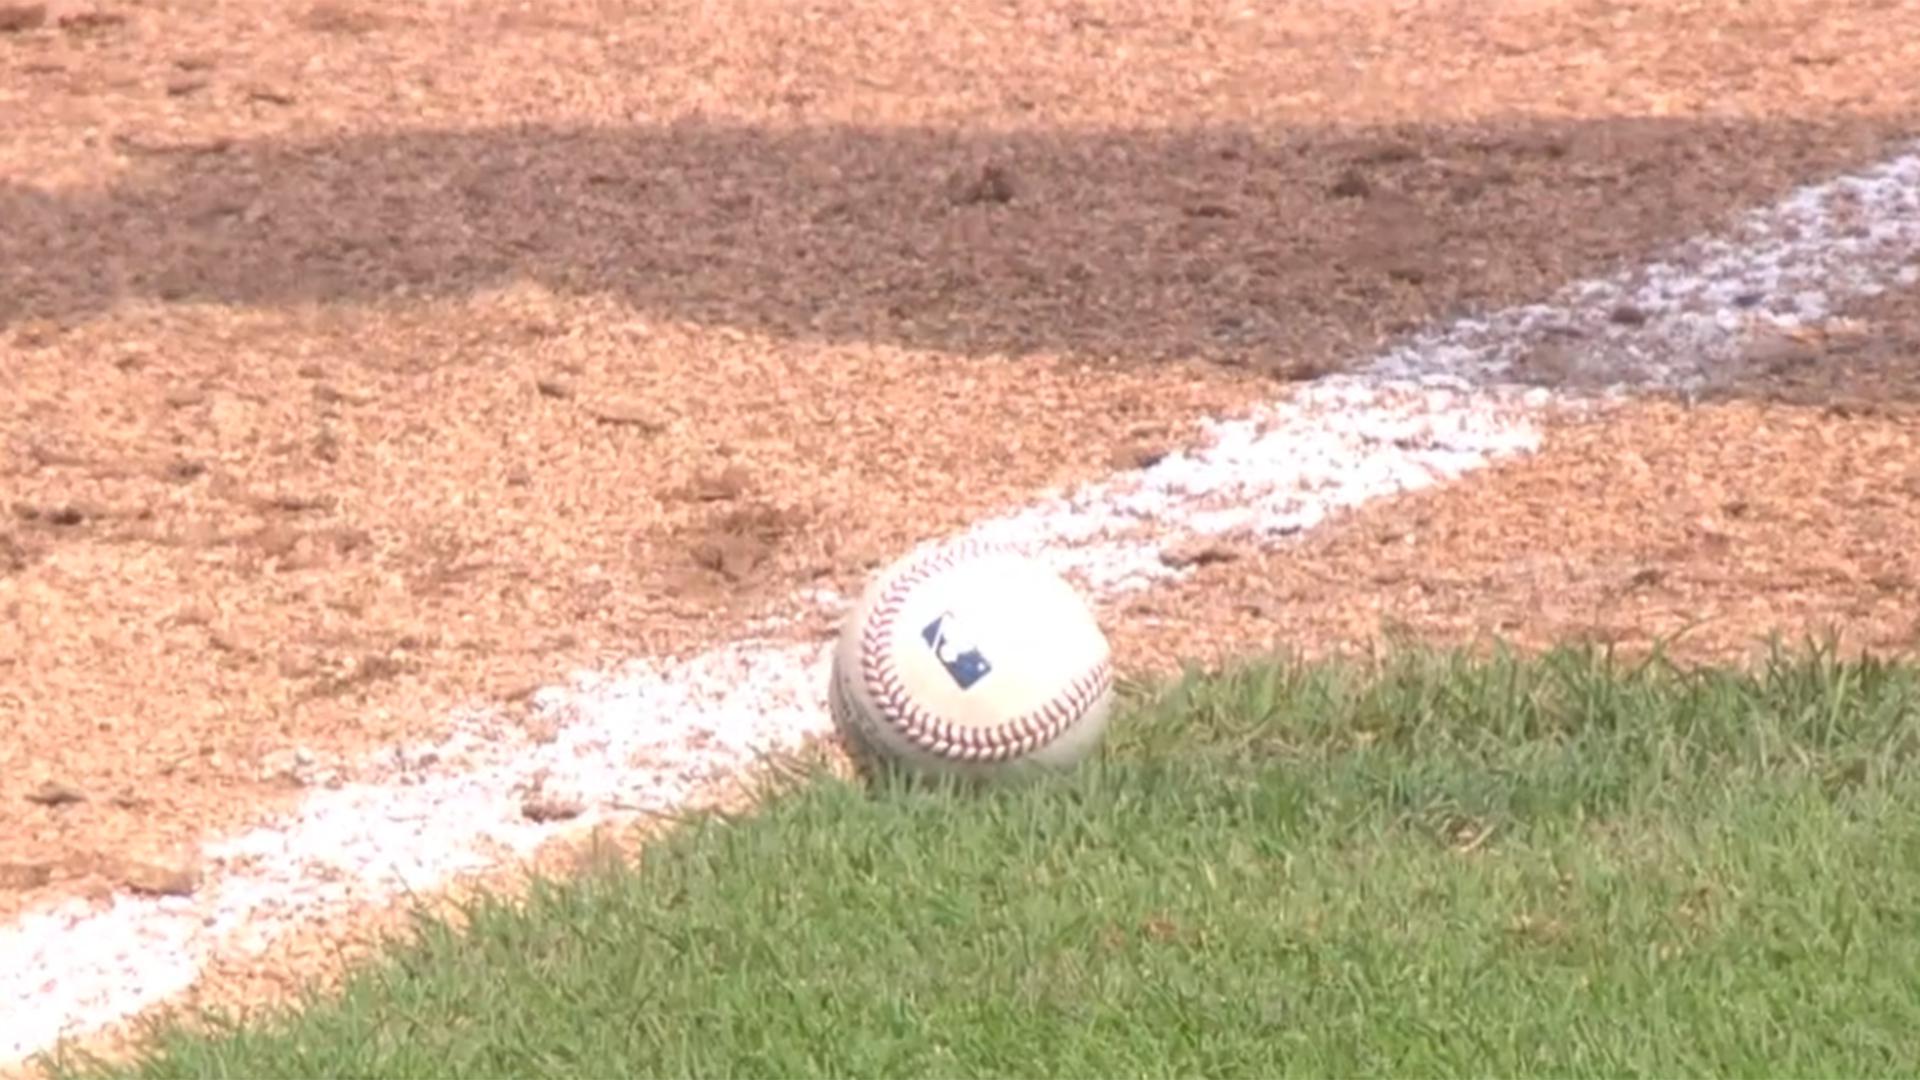 A baseball sits on the grass just fair inside the foul line